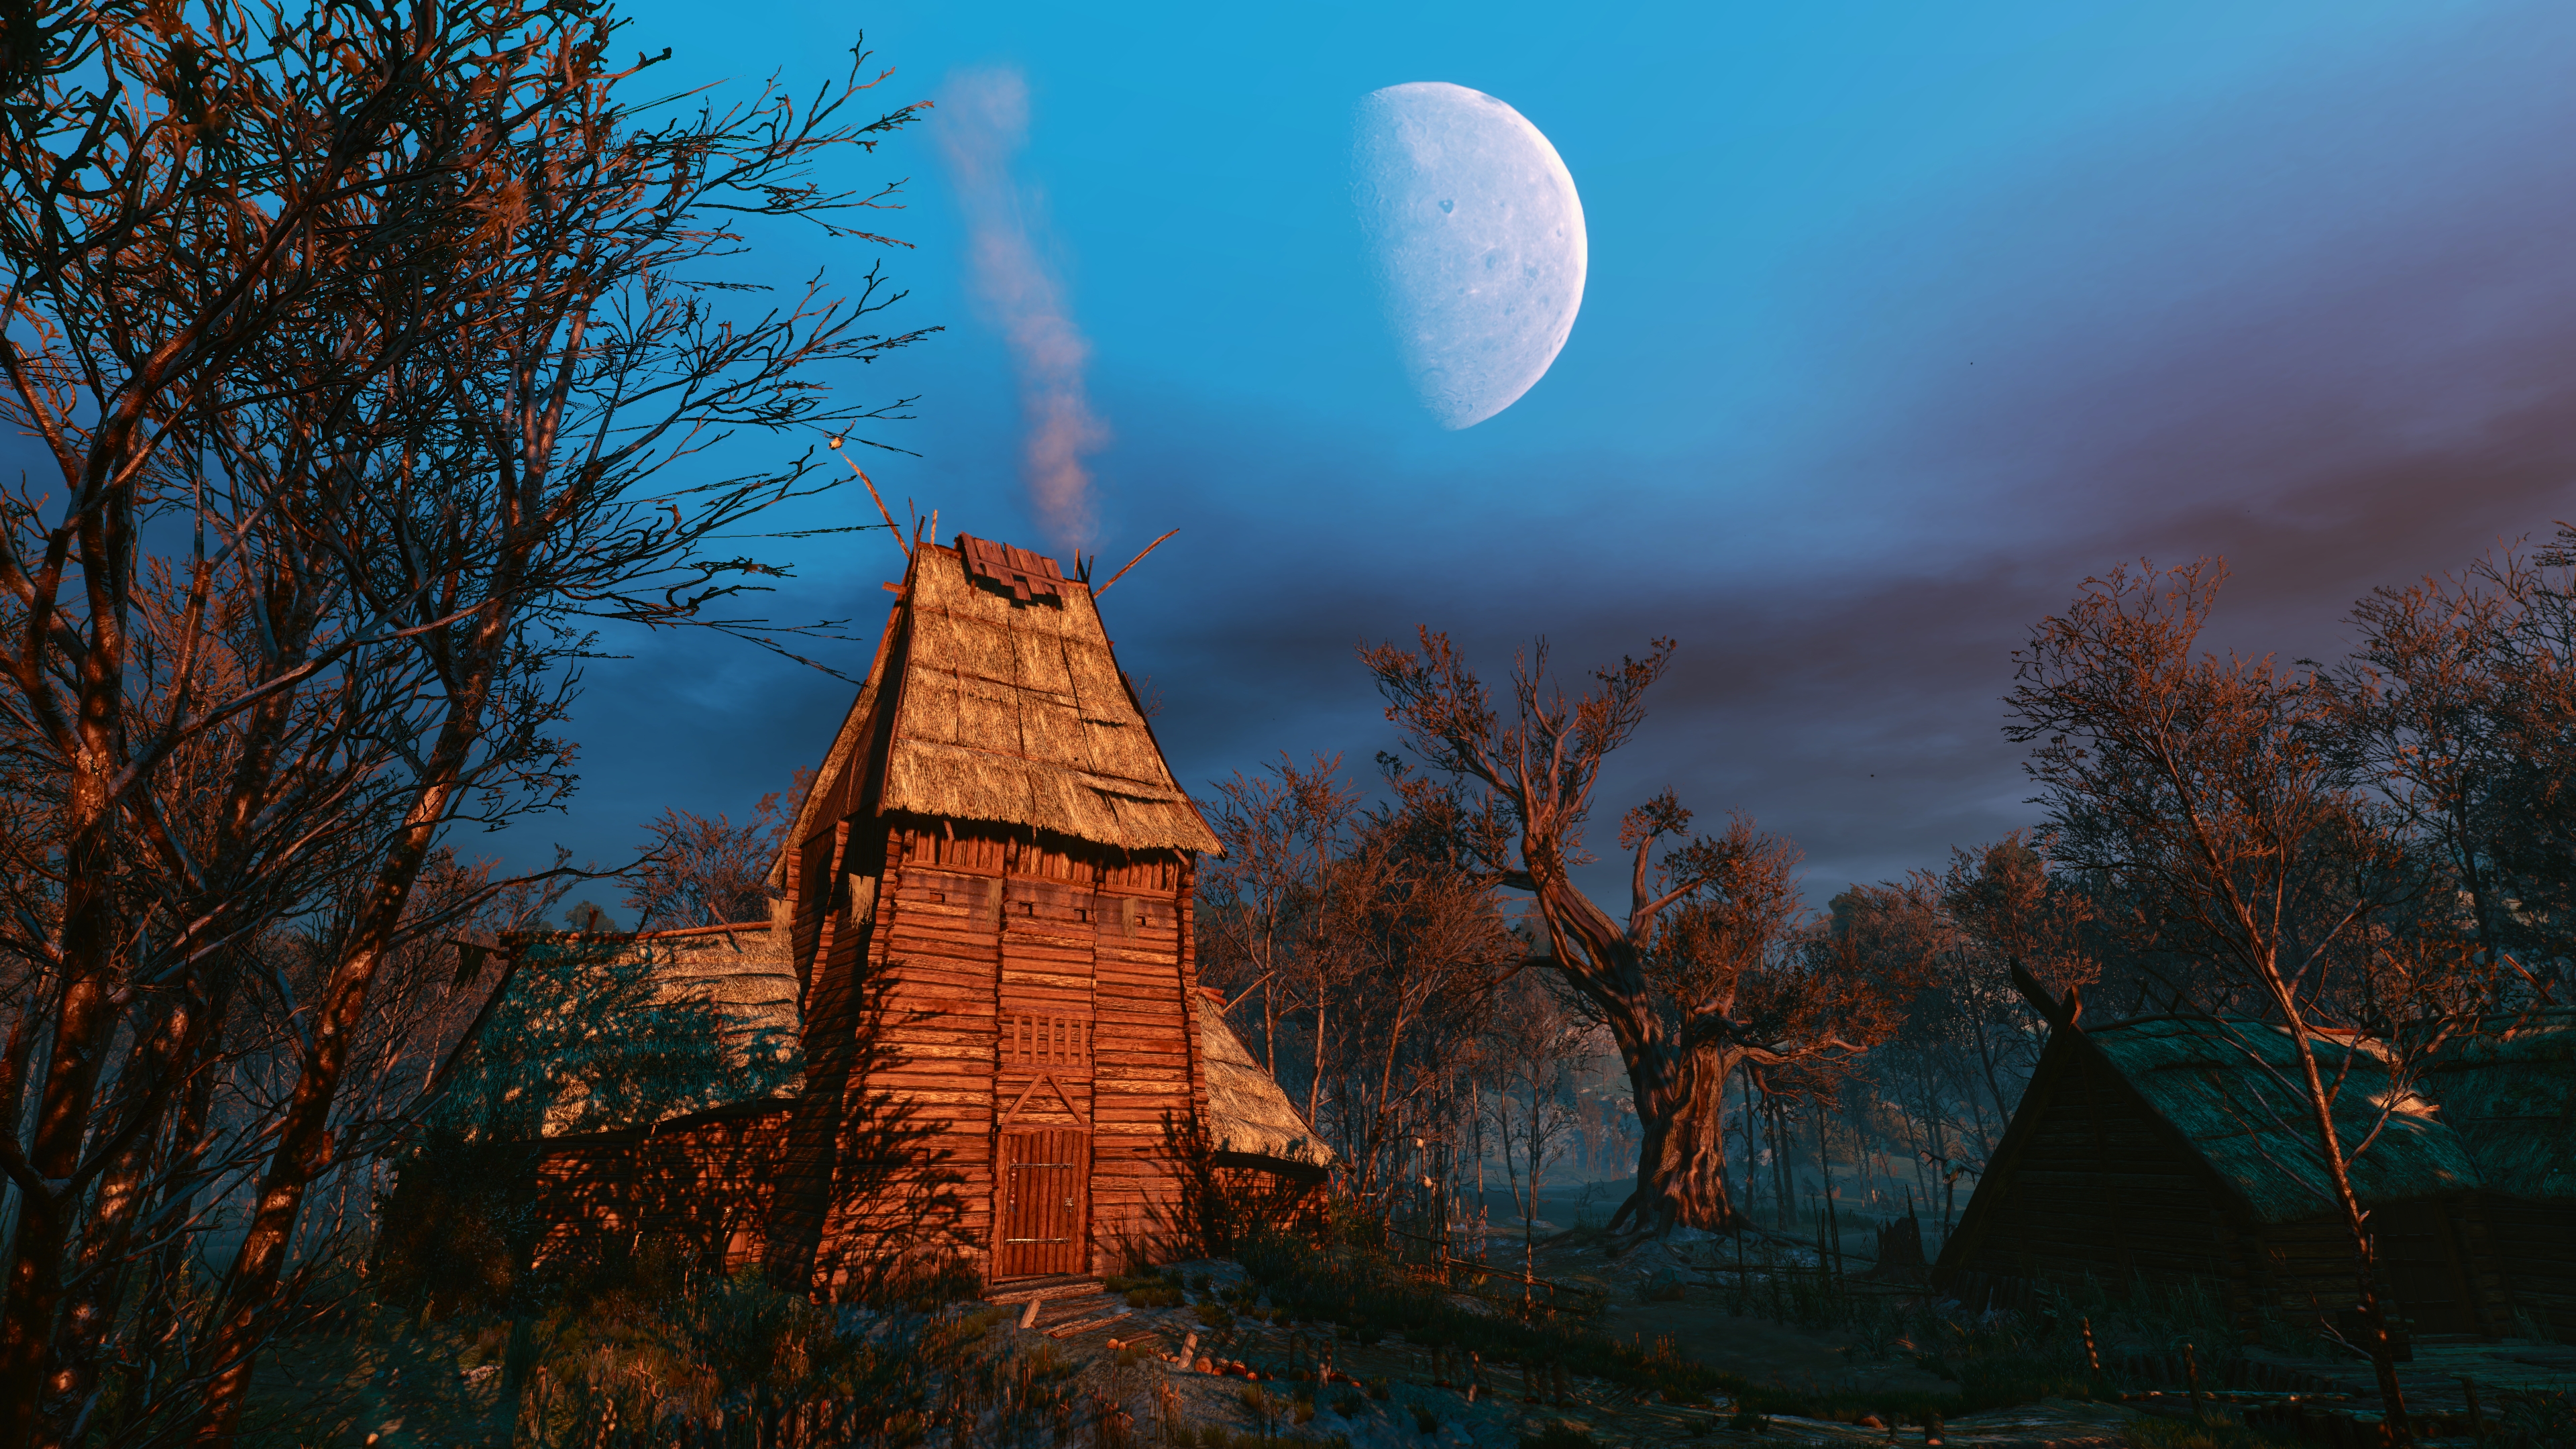 General 3840x2160 The Witcher 3: Wild Hunt video game landscape RPG video games PC gaming screen shot